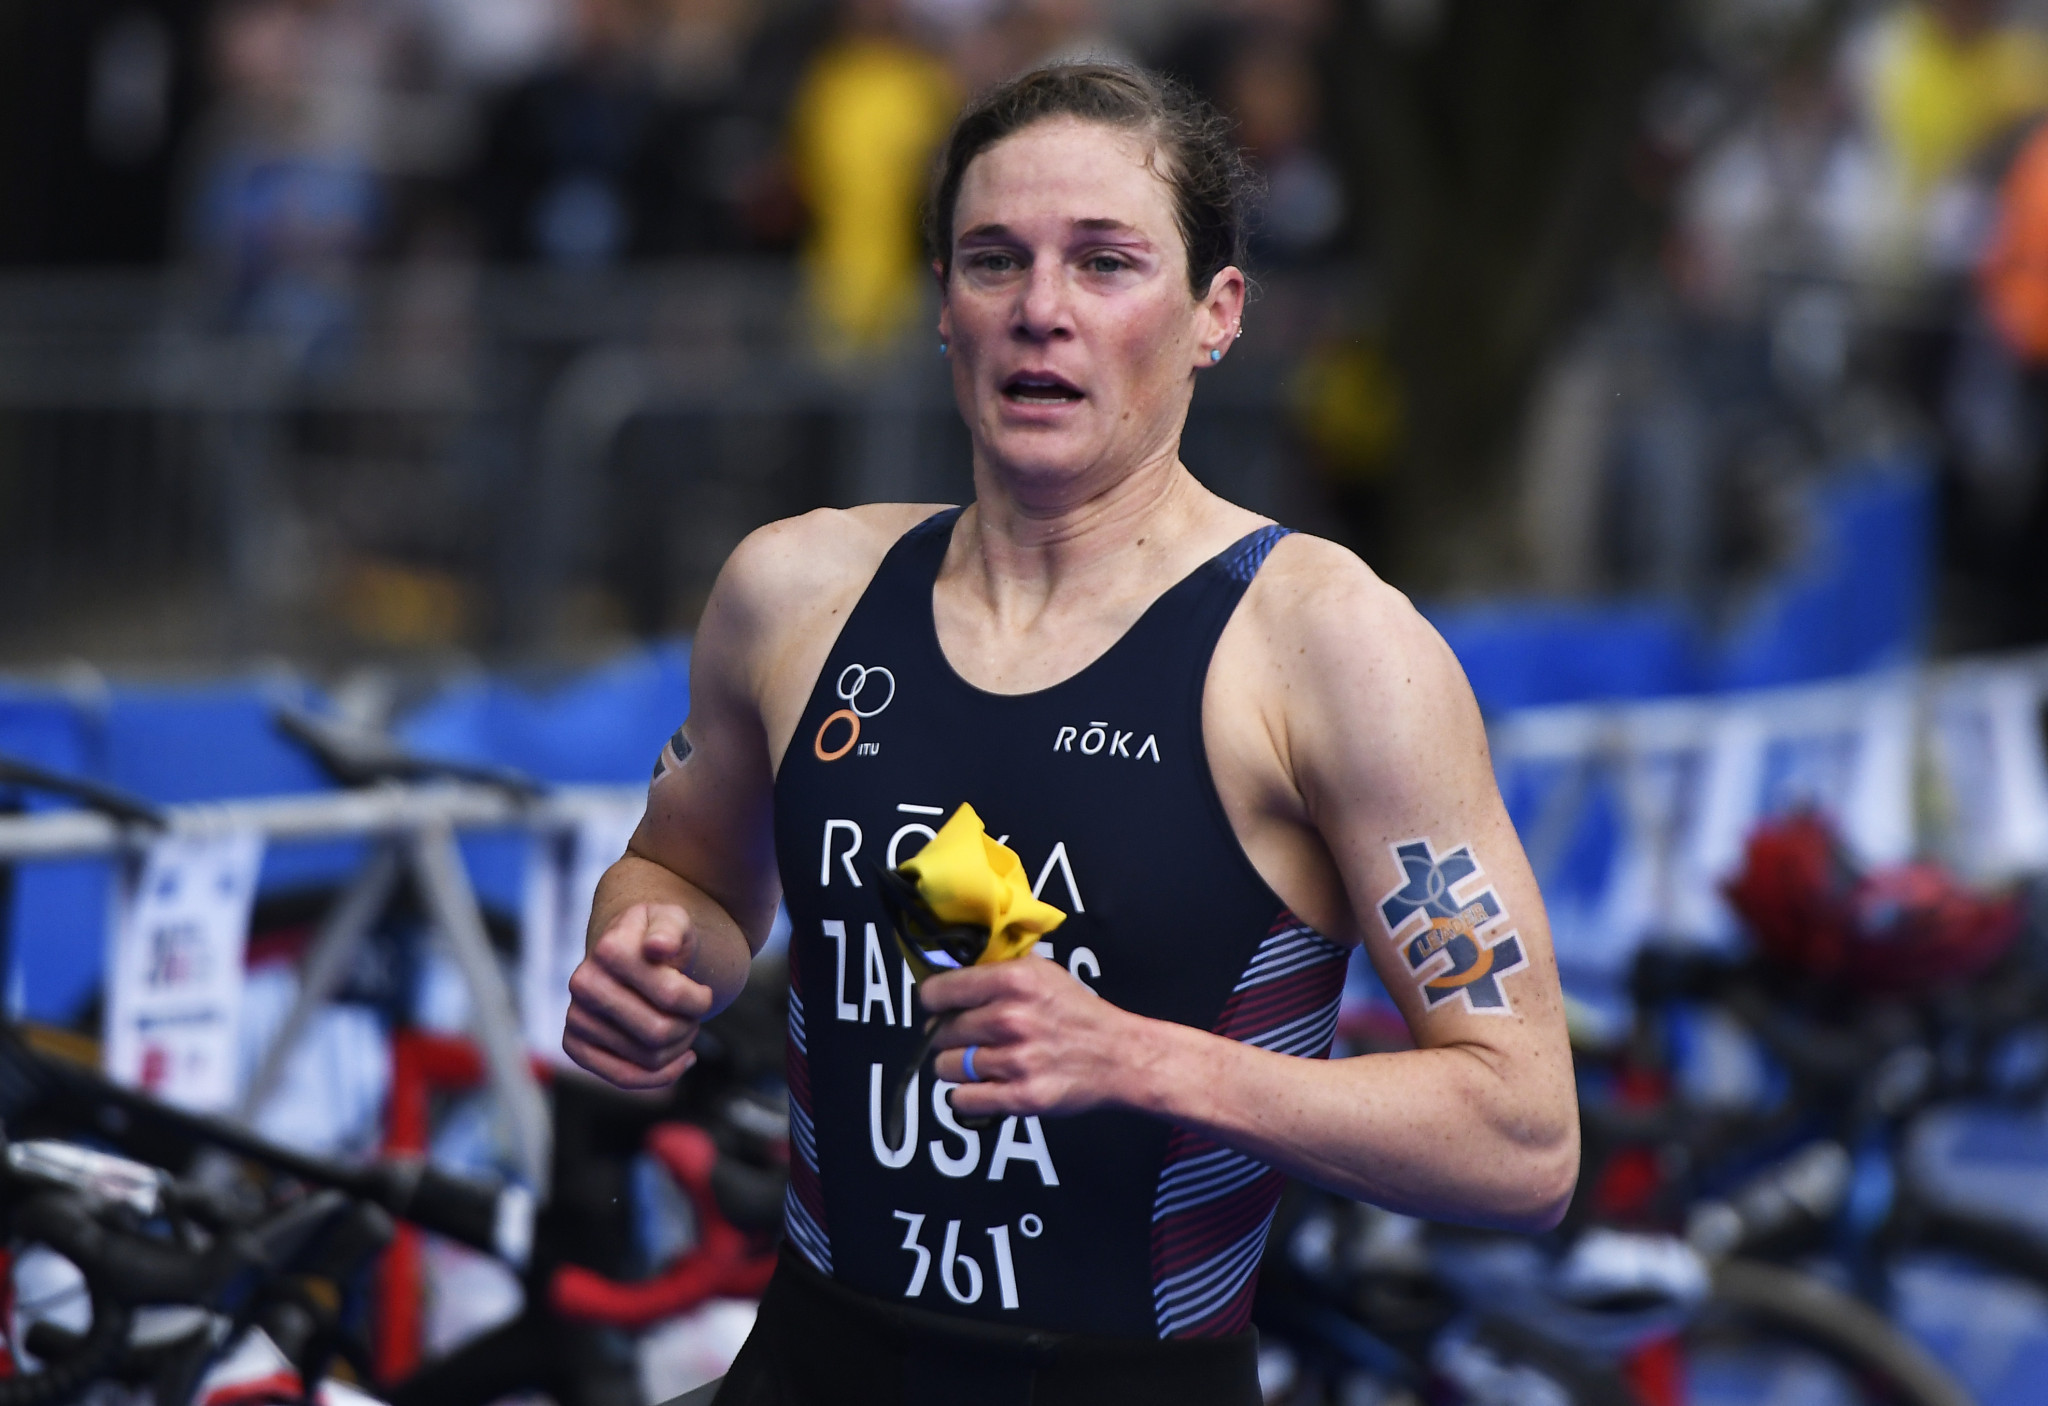 Triathlete Katie Zaferes is one of five contenders for the female-athlete-of-the-month award ©Getty Images